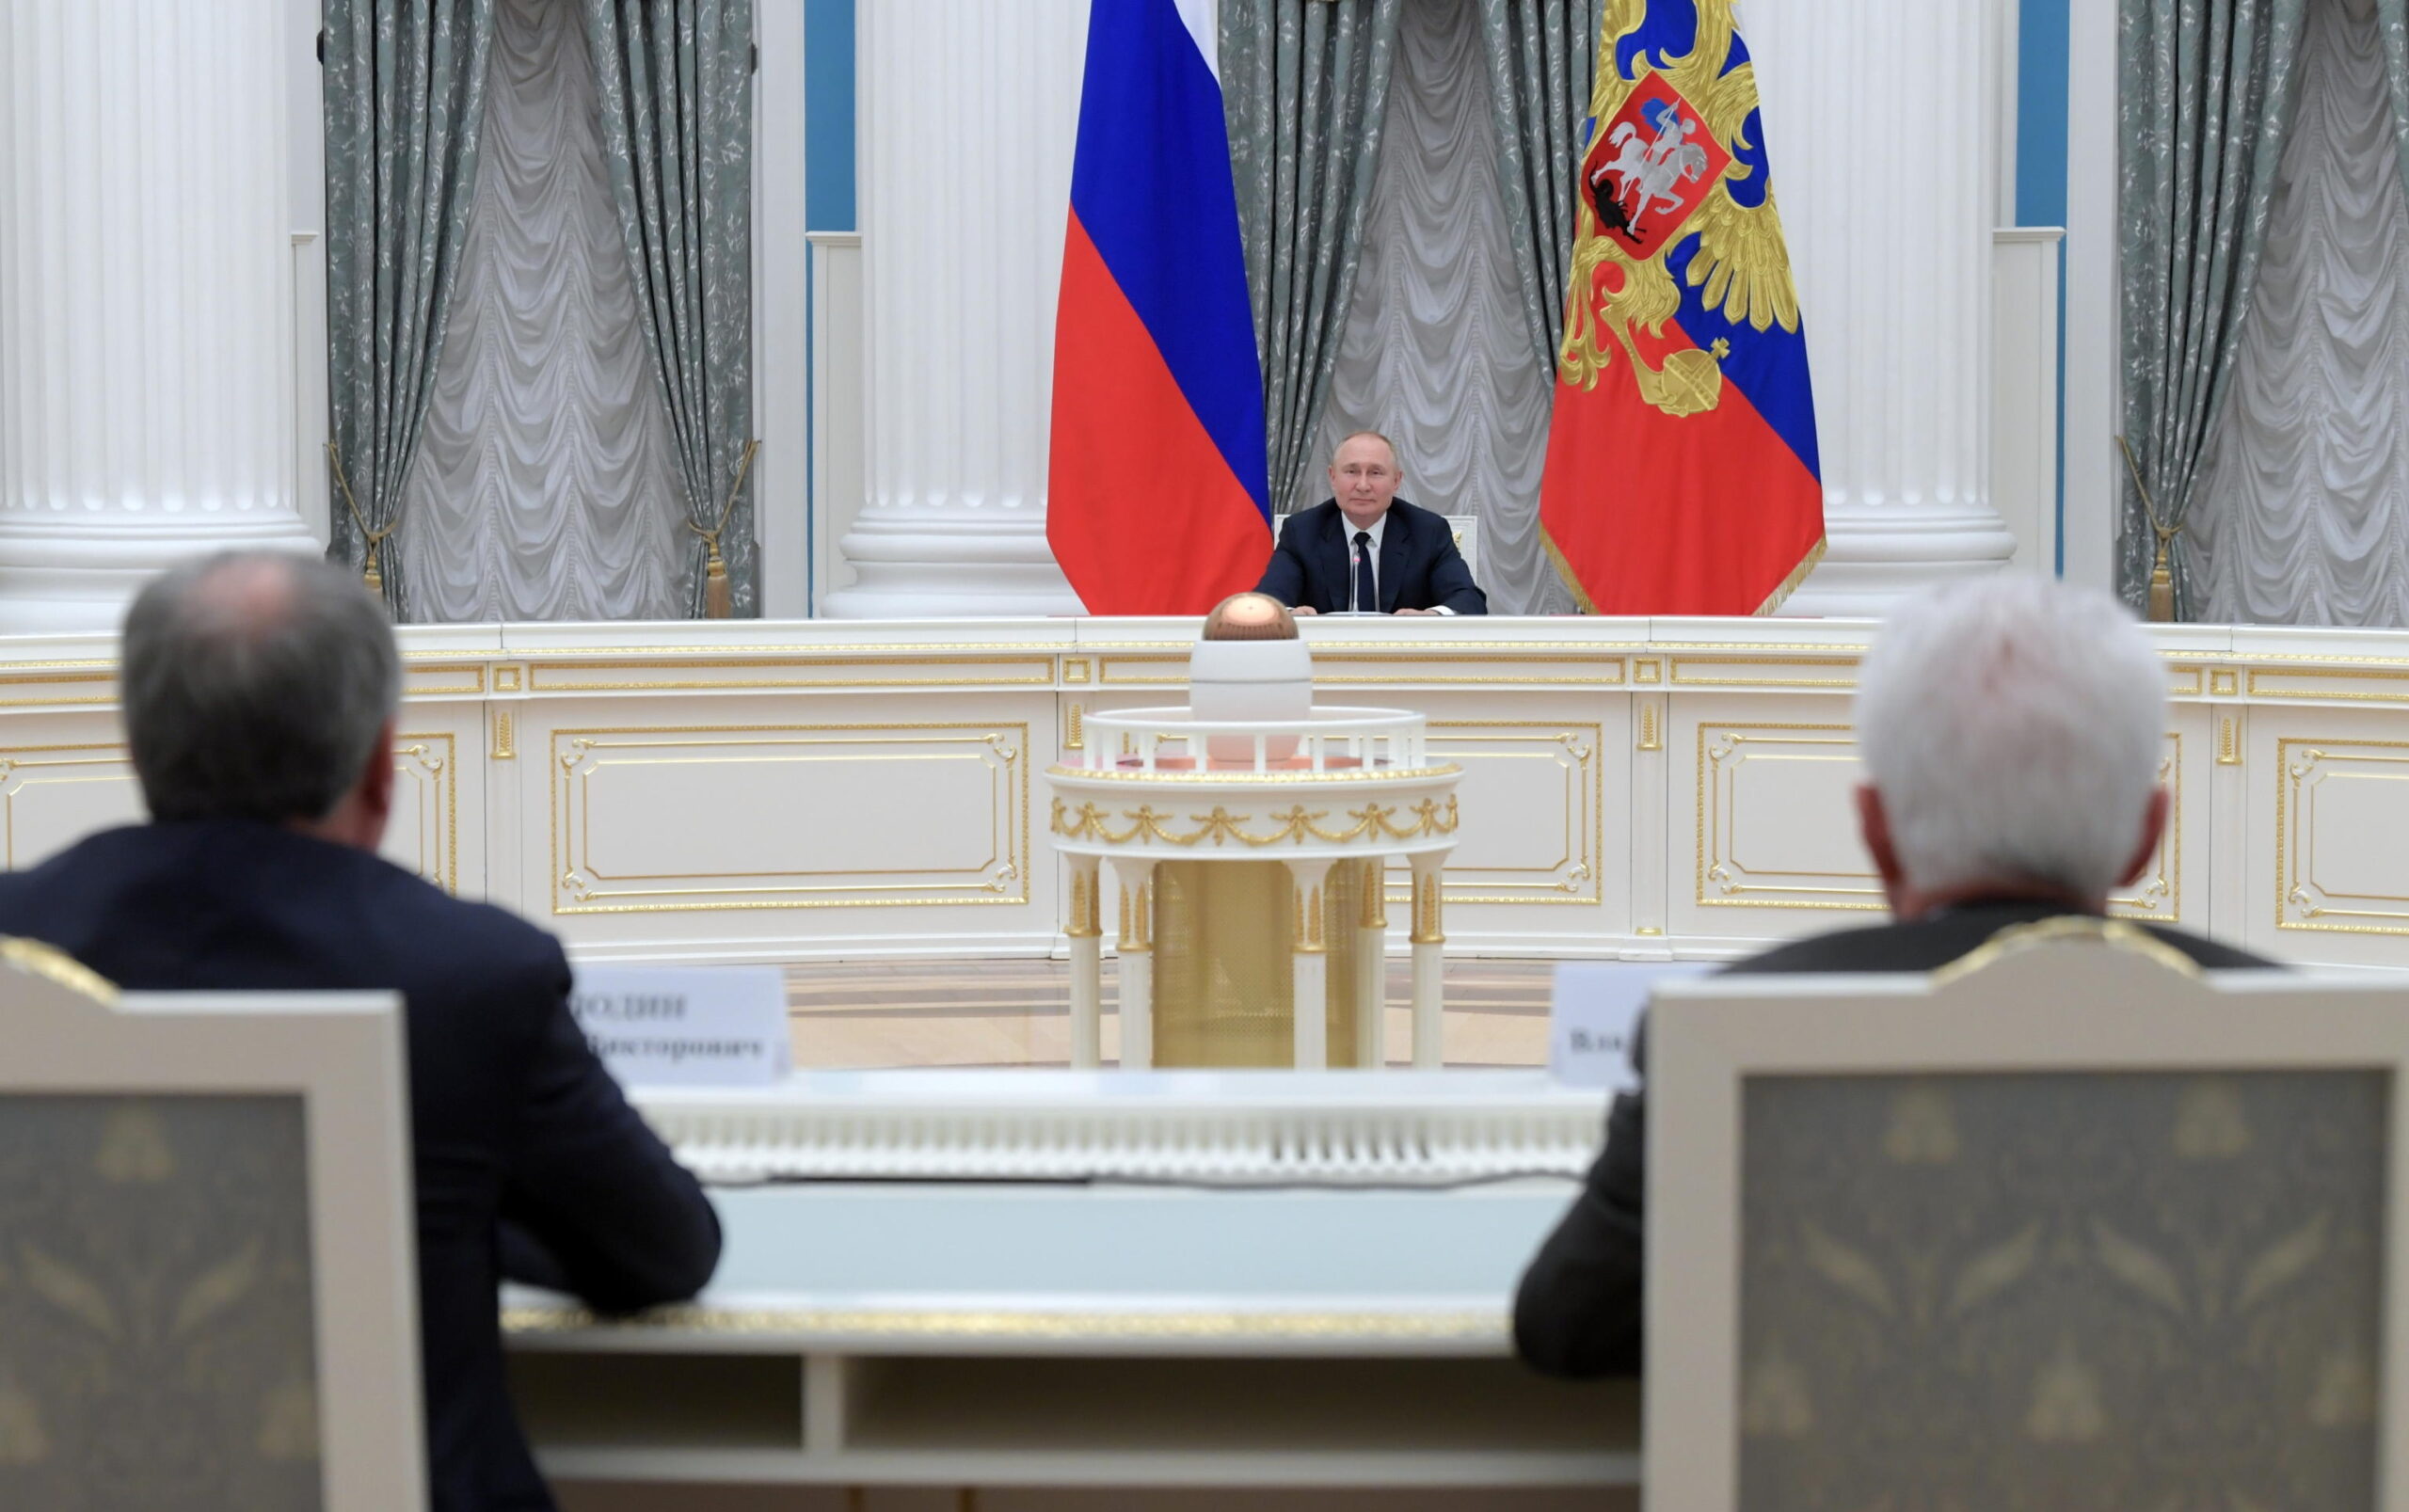 epa10057680 Russian President Vladimir Putin (C) attends a meeting with leaders of the Russian State Duma, the lower house of parliament, and heads of parliamentary factions at the Kremlin in Moscow, Russia, 07 July 2022.  EPA/ALEXEI NIKOLSKY/SPUTNIK/KREMLIN POOL MANDATORY CREDIT